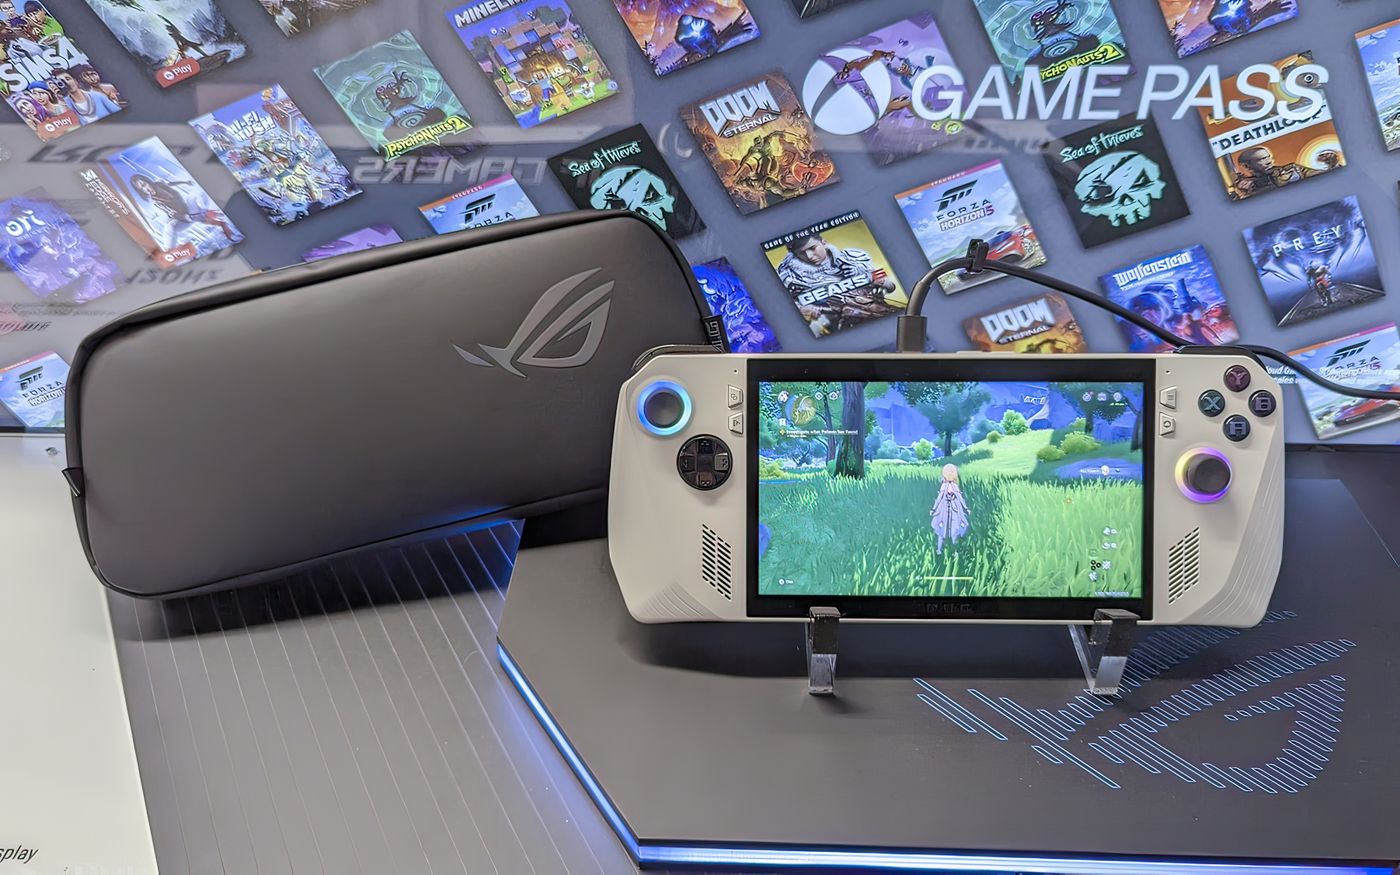 ASUS ROG Ally console prototypes have been pictured, featuring a